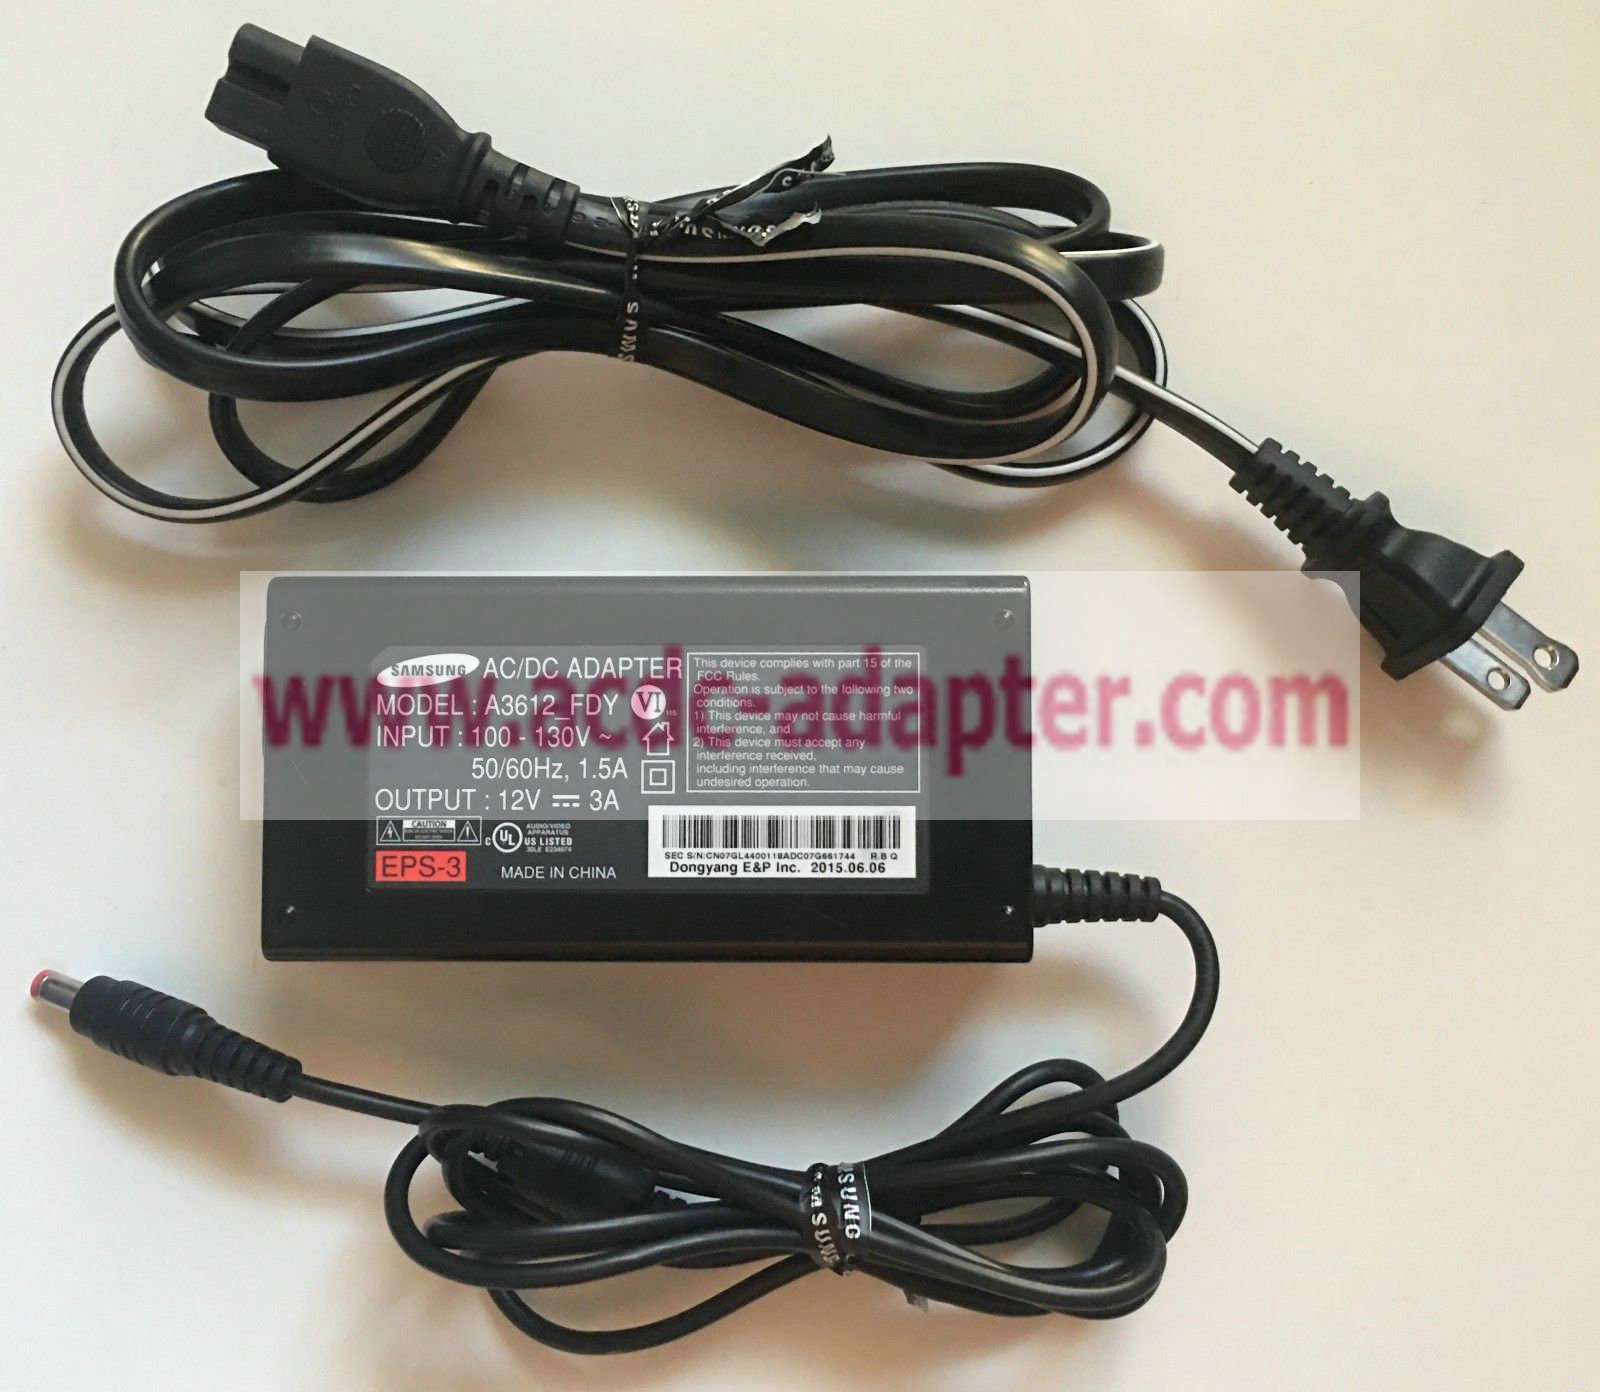 Brand new SAMSUNG A3612_FDY 12VDC 3A AC/DC Adapter Power Supply Charger EPS-3 - Click Image to Close